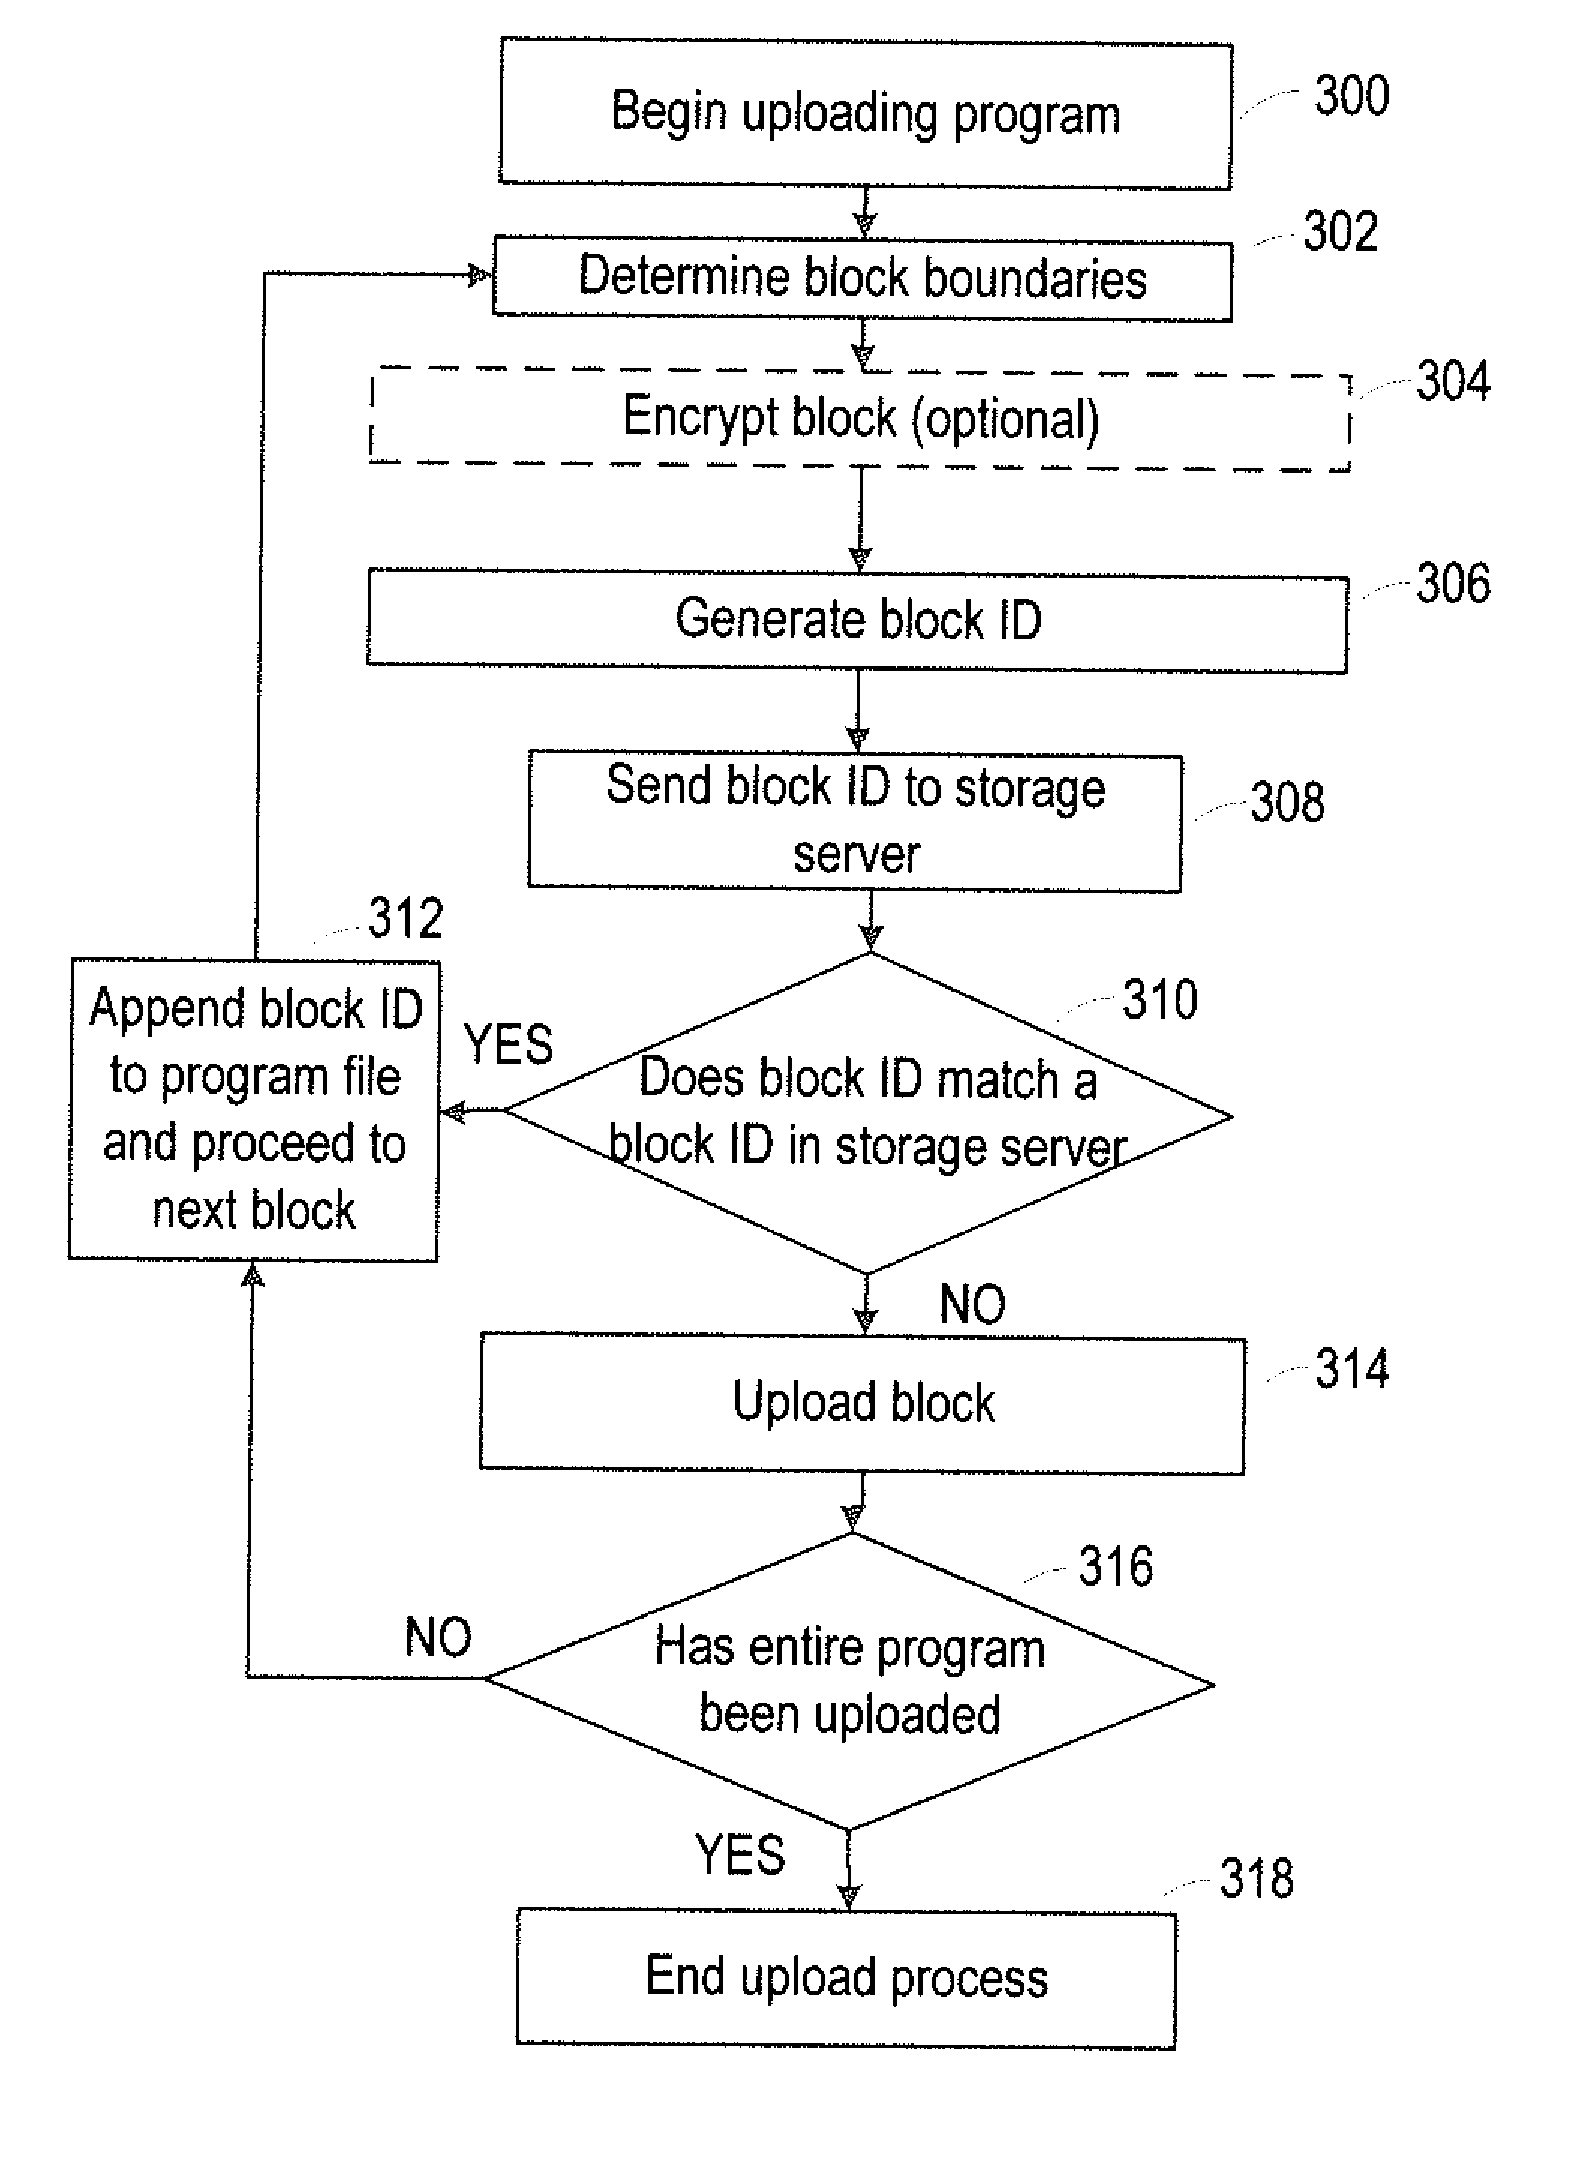 Systems and methods for digital media storage and playback